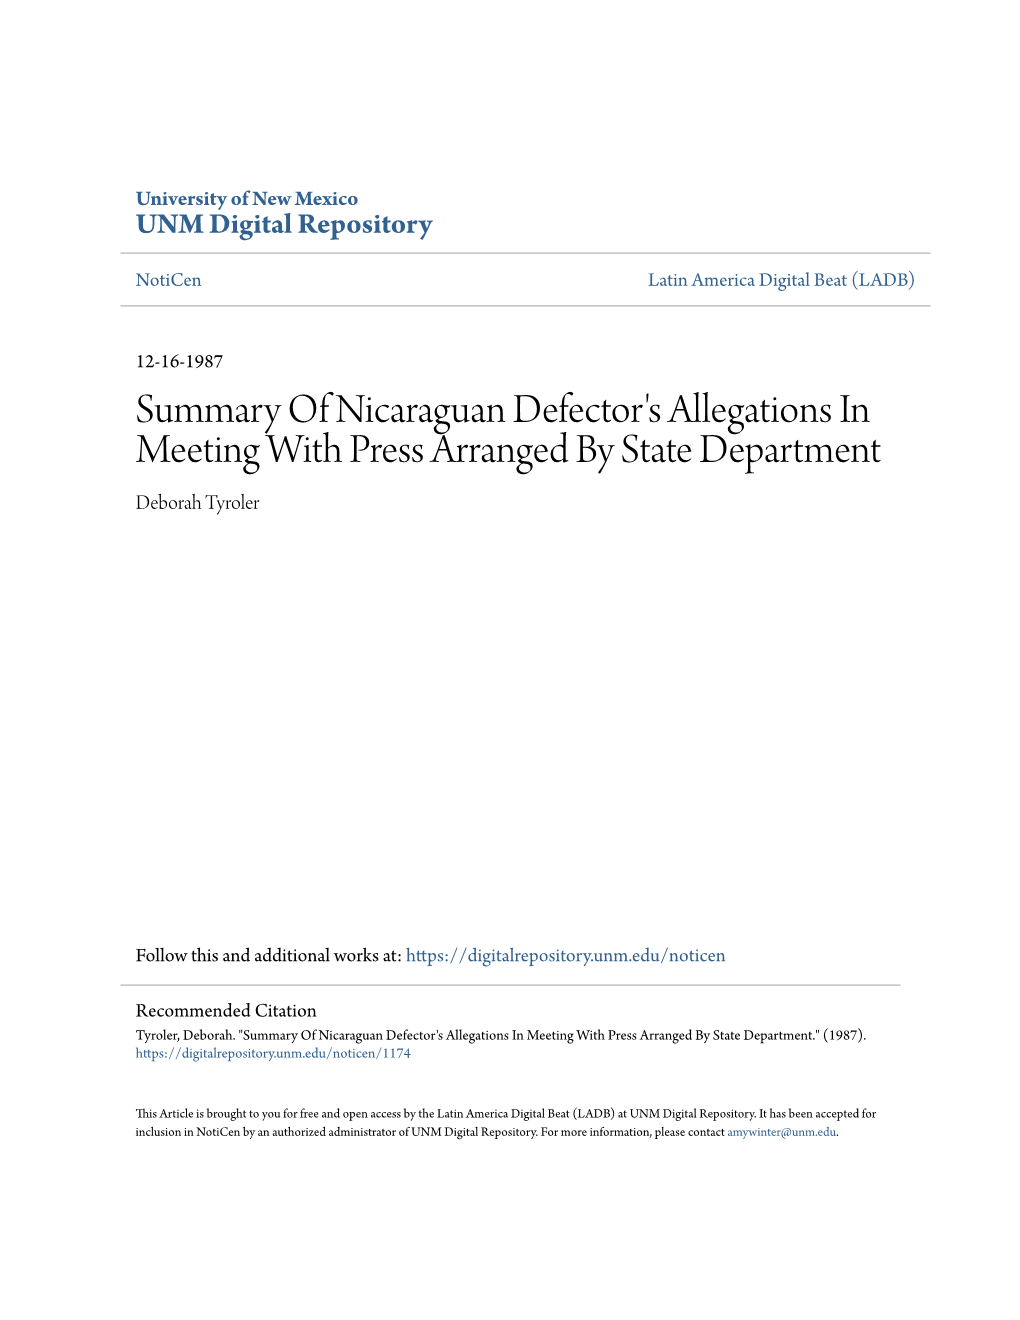 Summary of Nicaraguan Defector's Allegations in Meeting with Press Arranged by State Department Deborah Tyroler